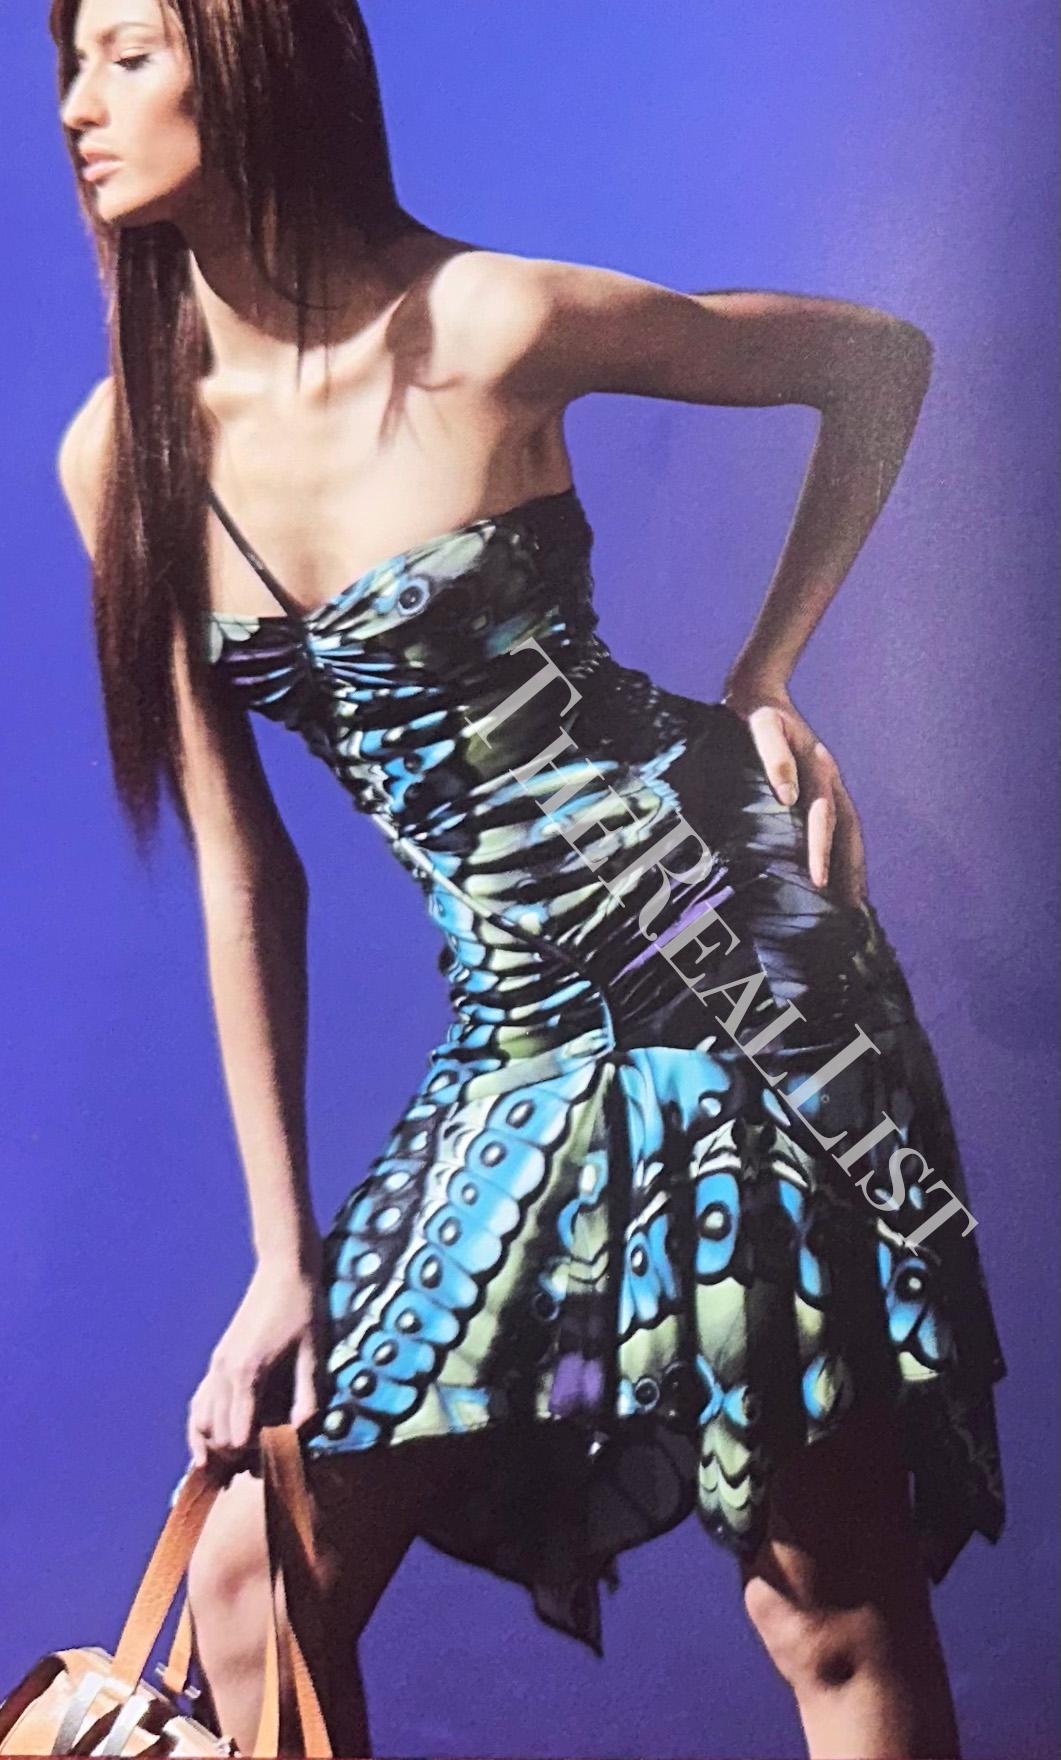 Presenting a stunning blue butterfly print Versace mini dress, designed by Donatella Versace. From the Fall/Winter 2003 collection, the dress's vibrant butterfly wing print creates a bold visual appeal, heightened by an asymmetric shoulder strap